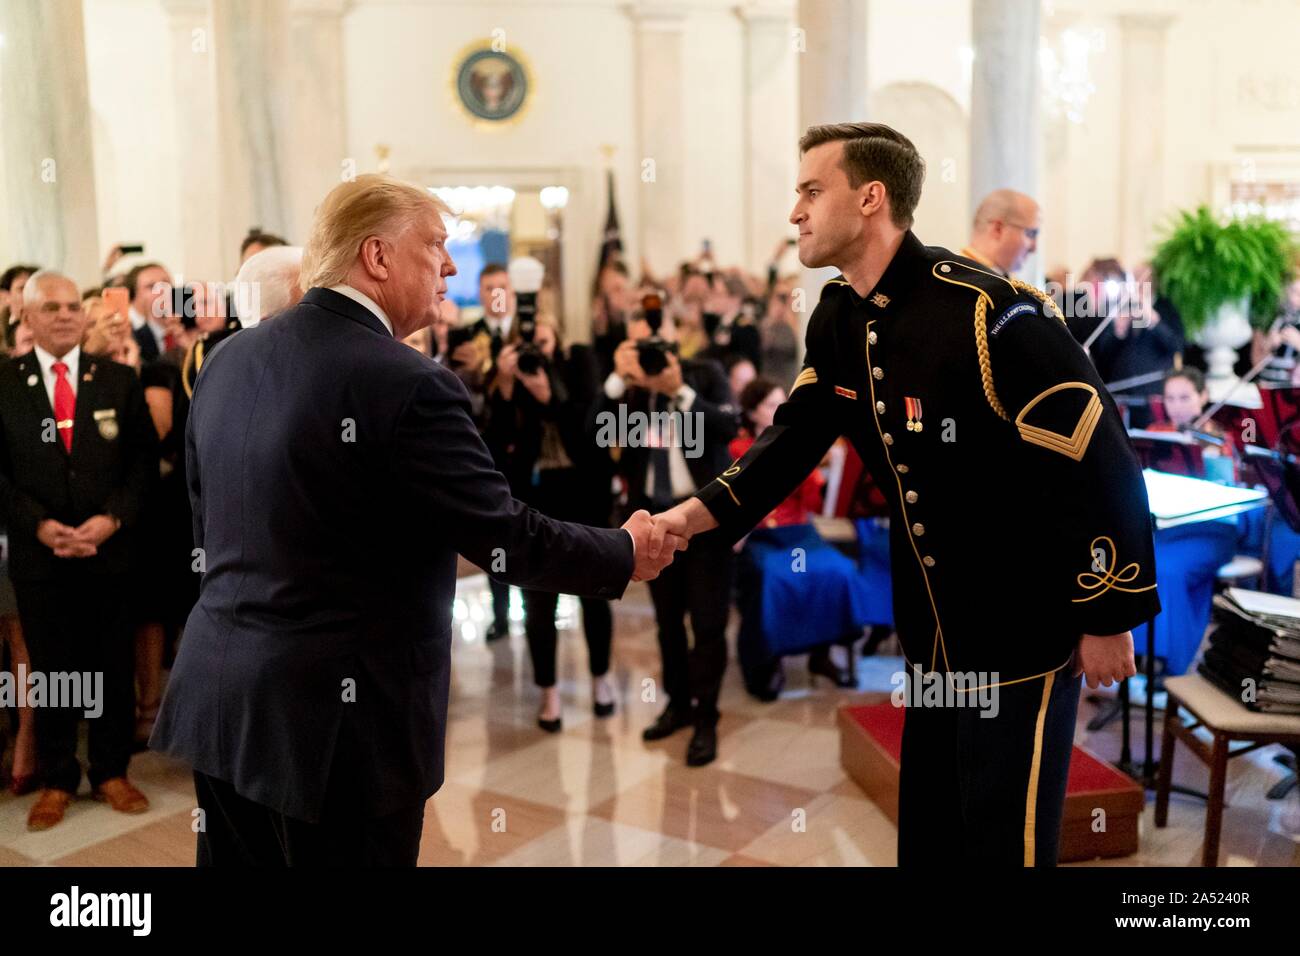 Washington, United States of America. 16 October, 2019. U.S President Donald Trump, left, thanks Staff Sgt. Christian Douglas Hoff, right, of the U.S. Army Choir for his performance during a reception in honor of Italian President Sergio Mattarella in the Grand Foyer of the White House October 16, 2019 in Washington, DC. Credit: Andrea Hanks/White House Photo/Alamy Live News Stock Photo